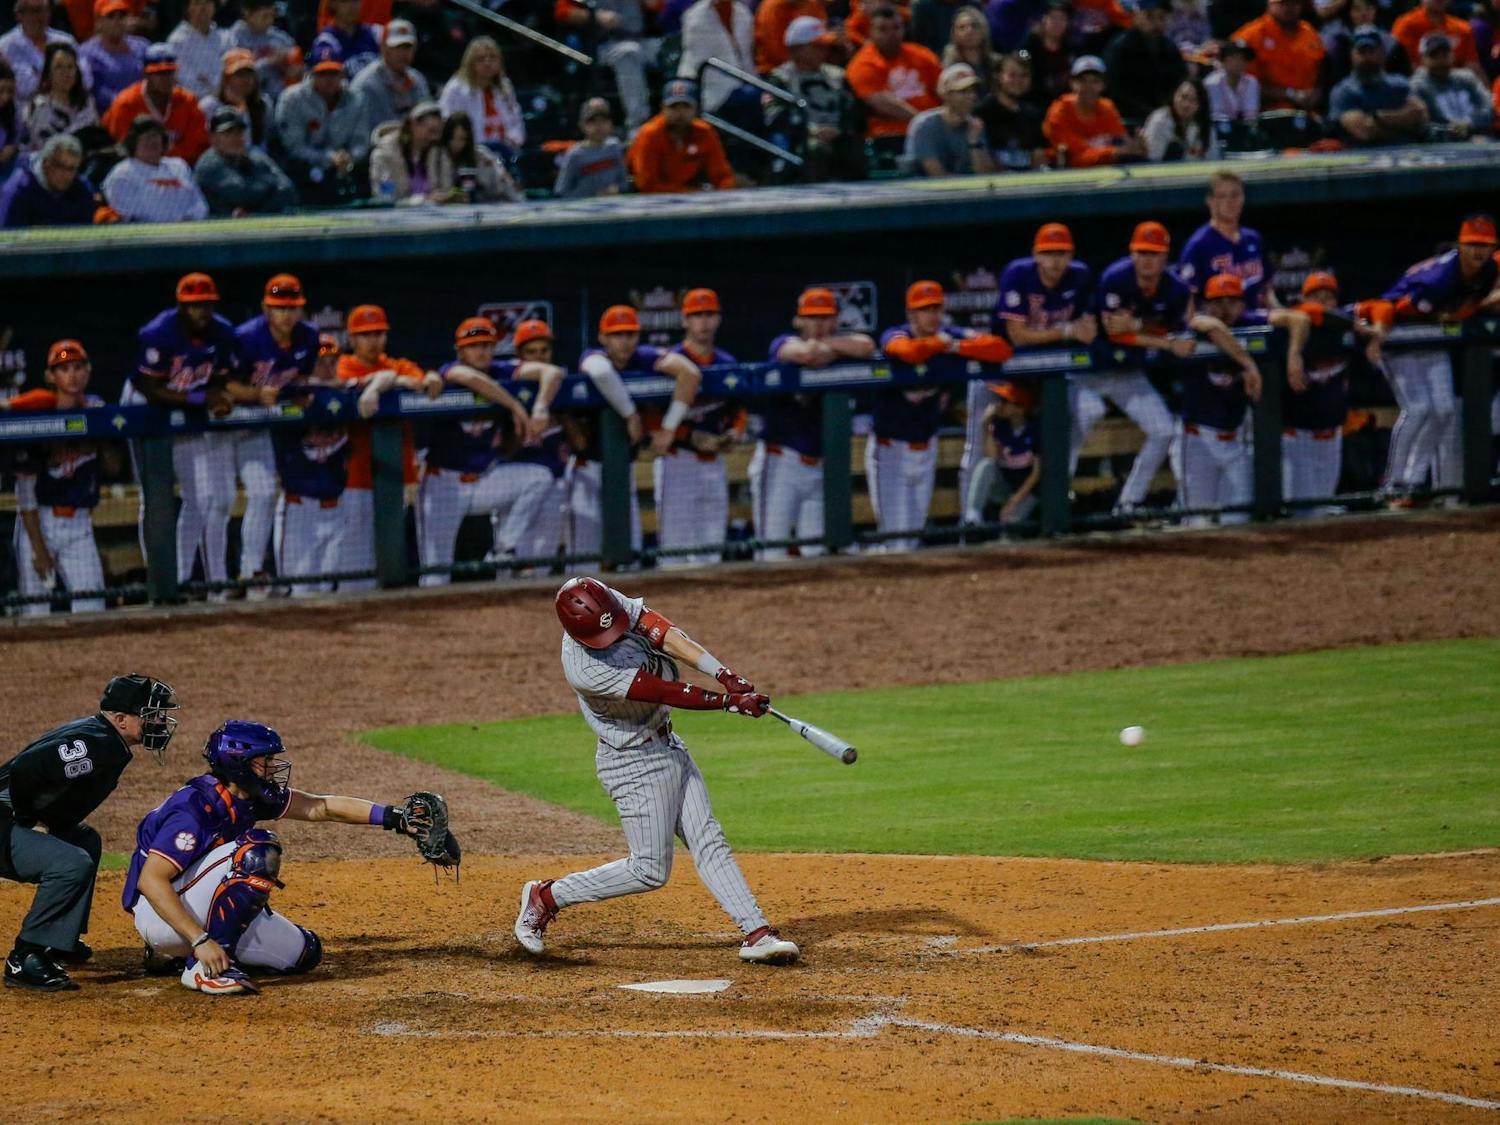 Sophomore infielder Will Tippett hits the ball during the “Battle at Bull Street” game between South Carolina and Clemson at Segra Park on March 2, 2024. Tippett went 2-5 and scored 2 runs in the Gamecocks’ 5-4 loss to the Tigers.